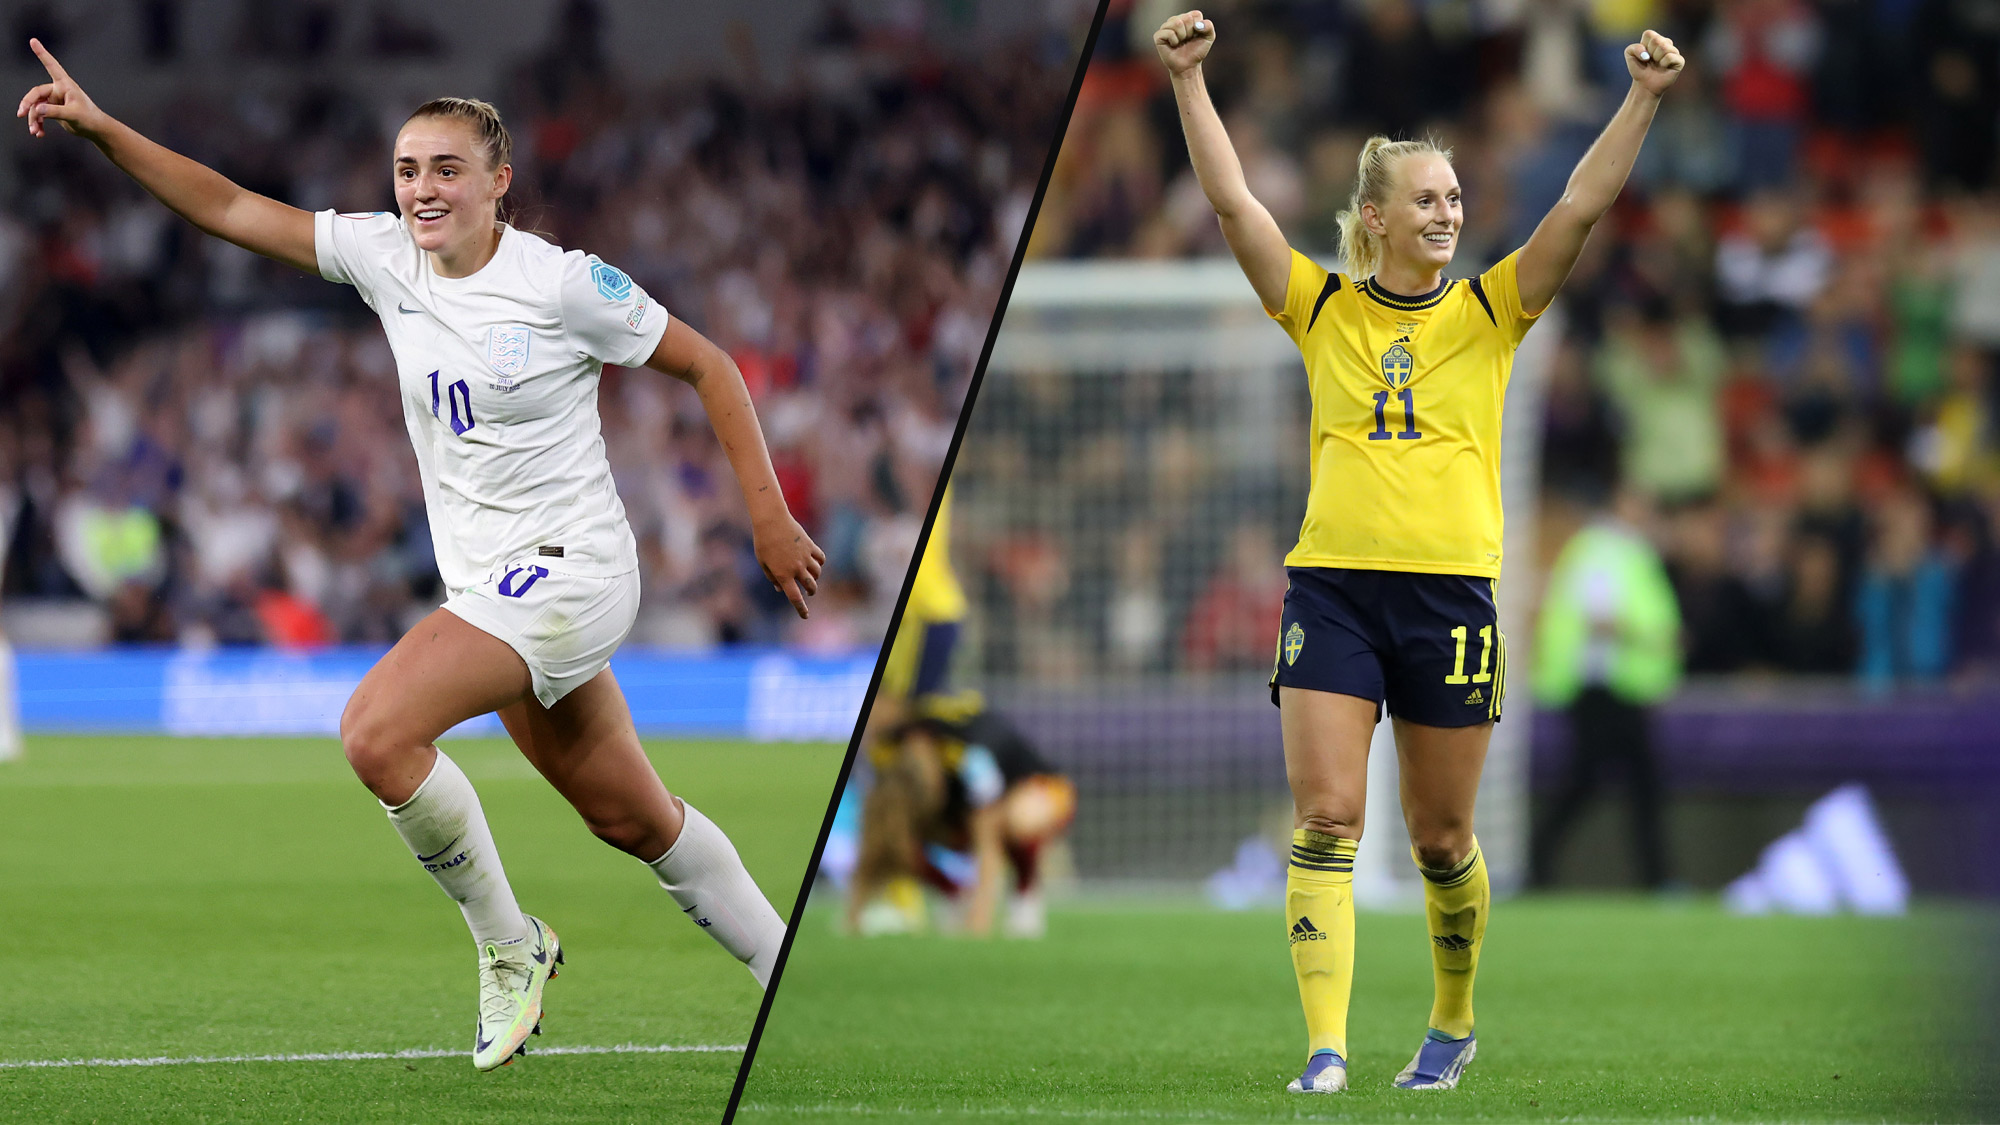 England vs Sweden live stream how to watch Womens EURO 2022 semi-final online and on TV from anywhere, team news TechRadar